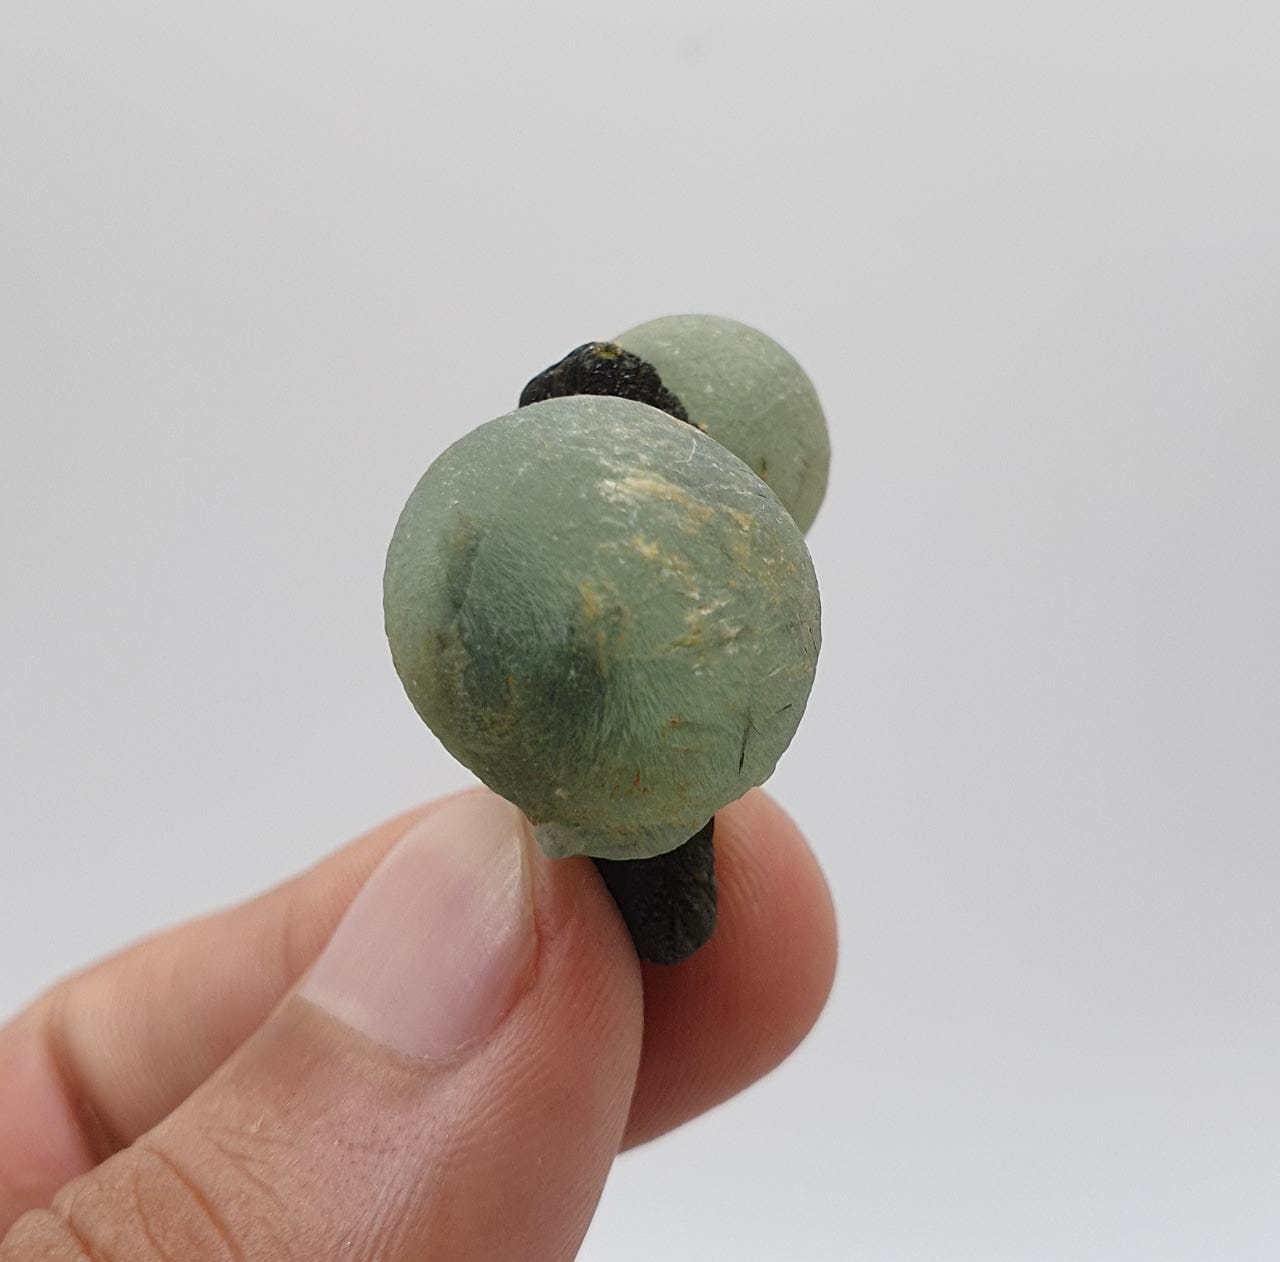 Cute and Artistic Piece of Prehnite Balls on Epidote from Mali, Africa